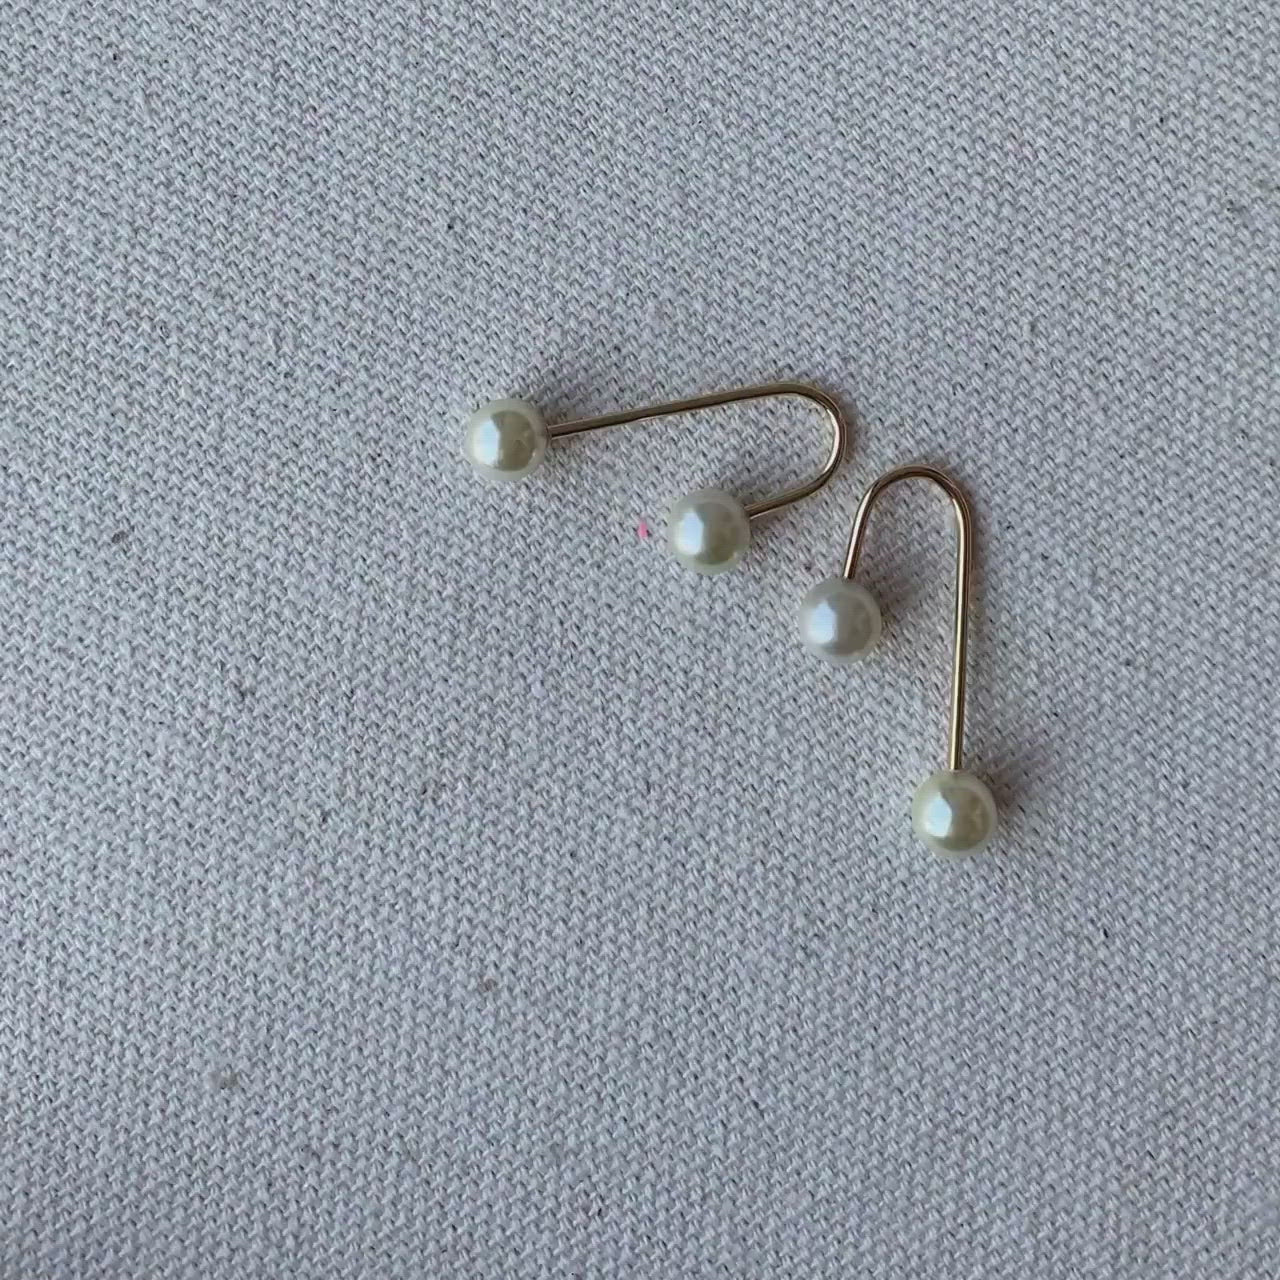 18k Gold Filled Screw Back Pearl Earrings for Wholesale and Jewelry Supplies